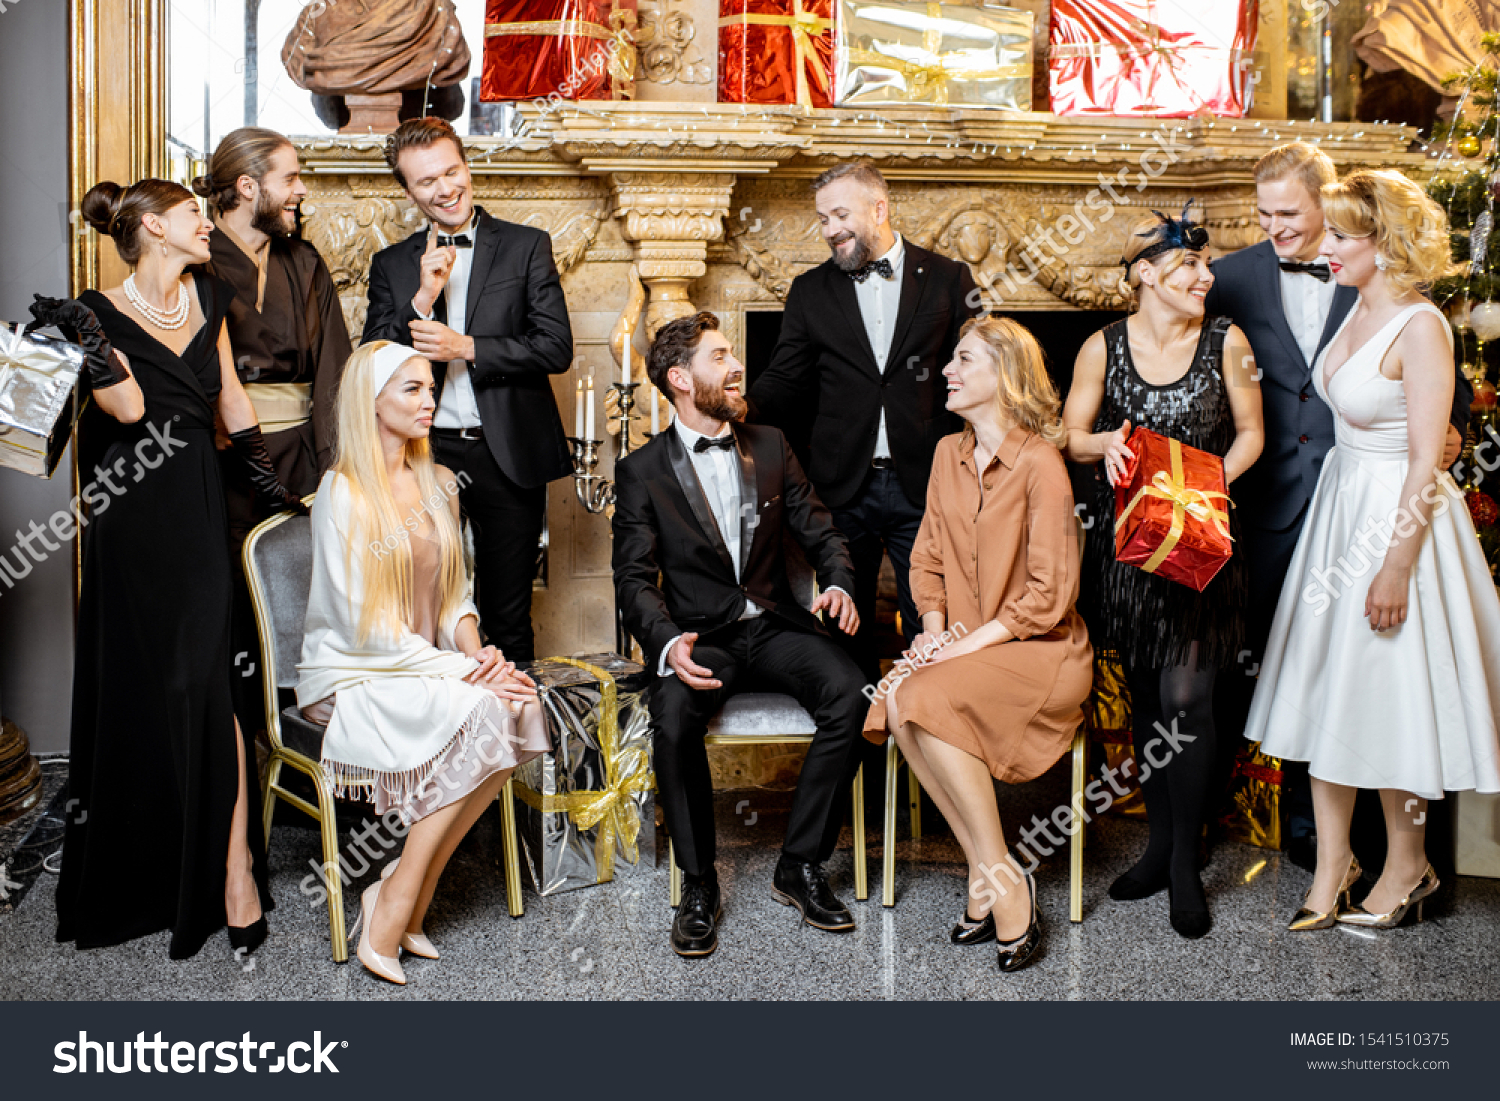 Staged group photo of an elegant well-dressed people near the beautifully decorated fireplace with christmas tree and presents during a New Year celebration #1541510375